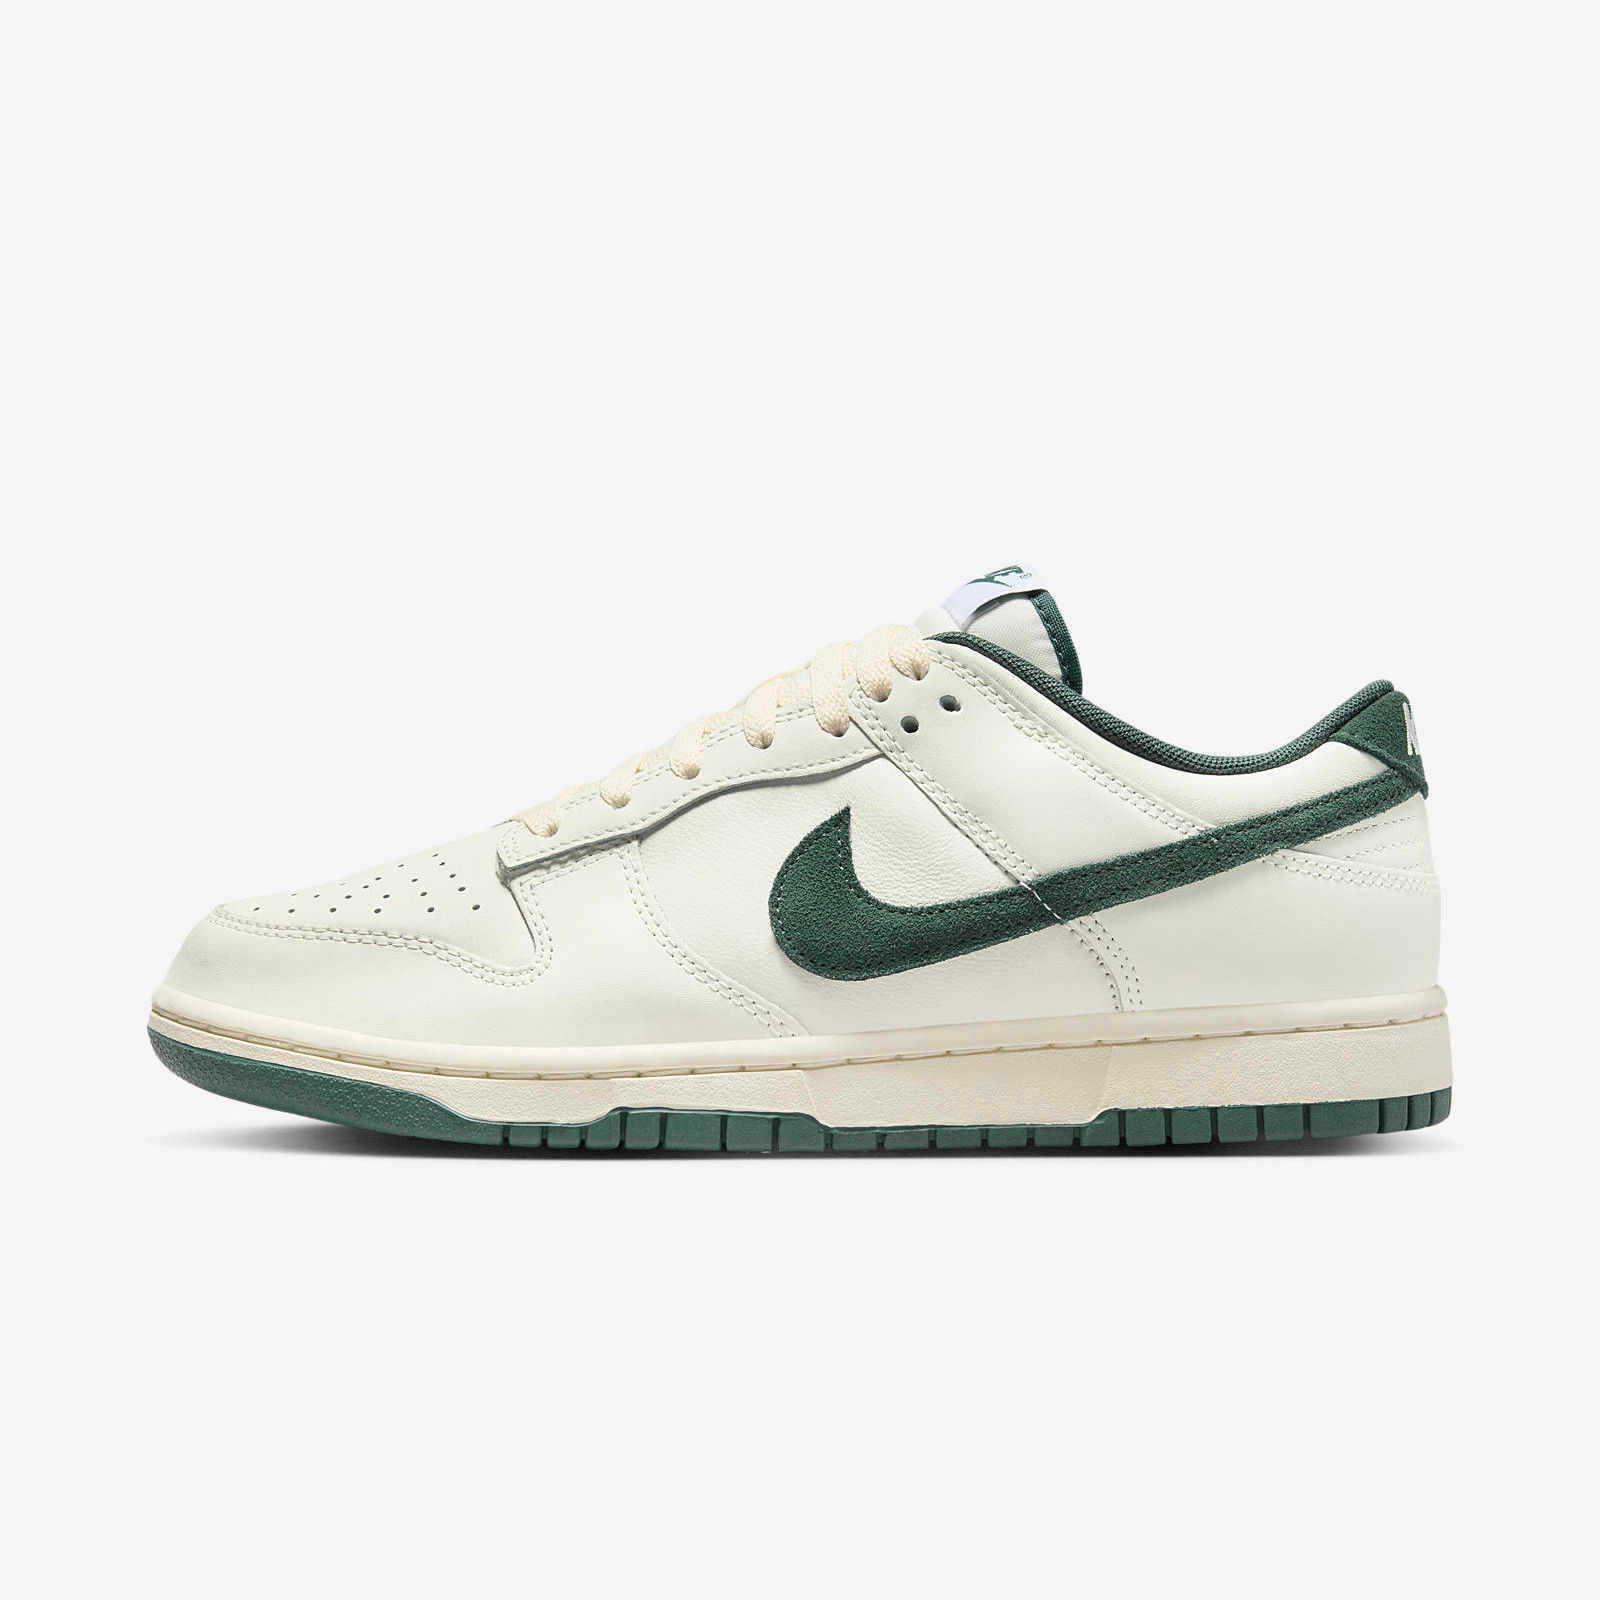 Nike Dunk Low
Athletic Department
« Deep Jungle »